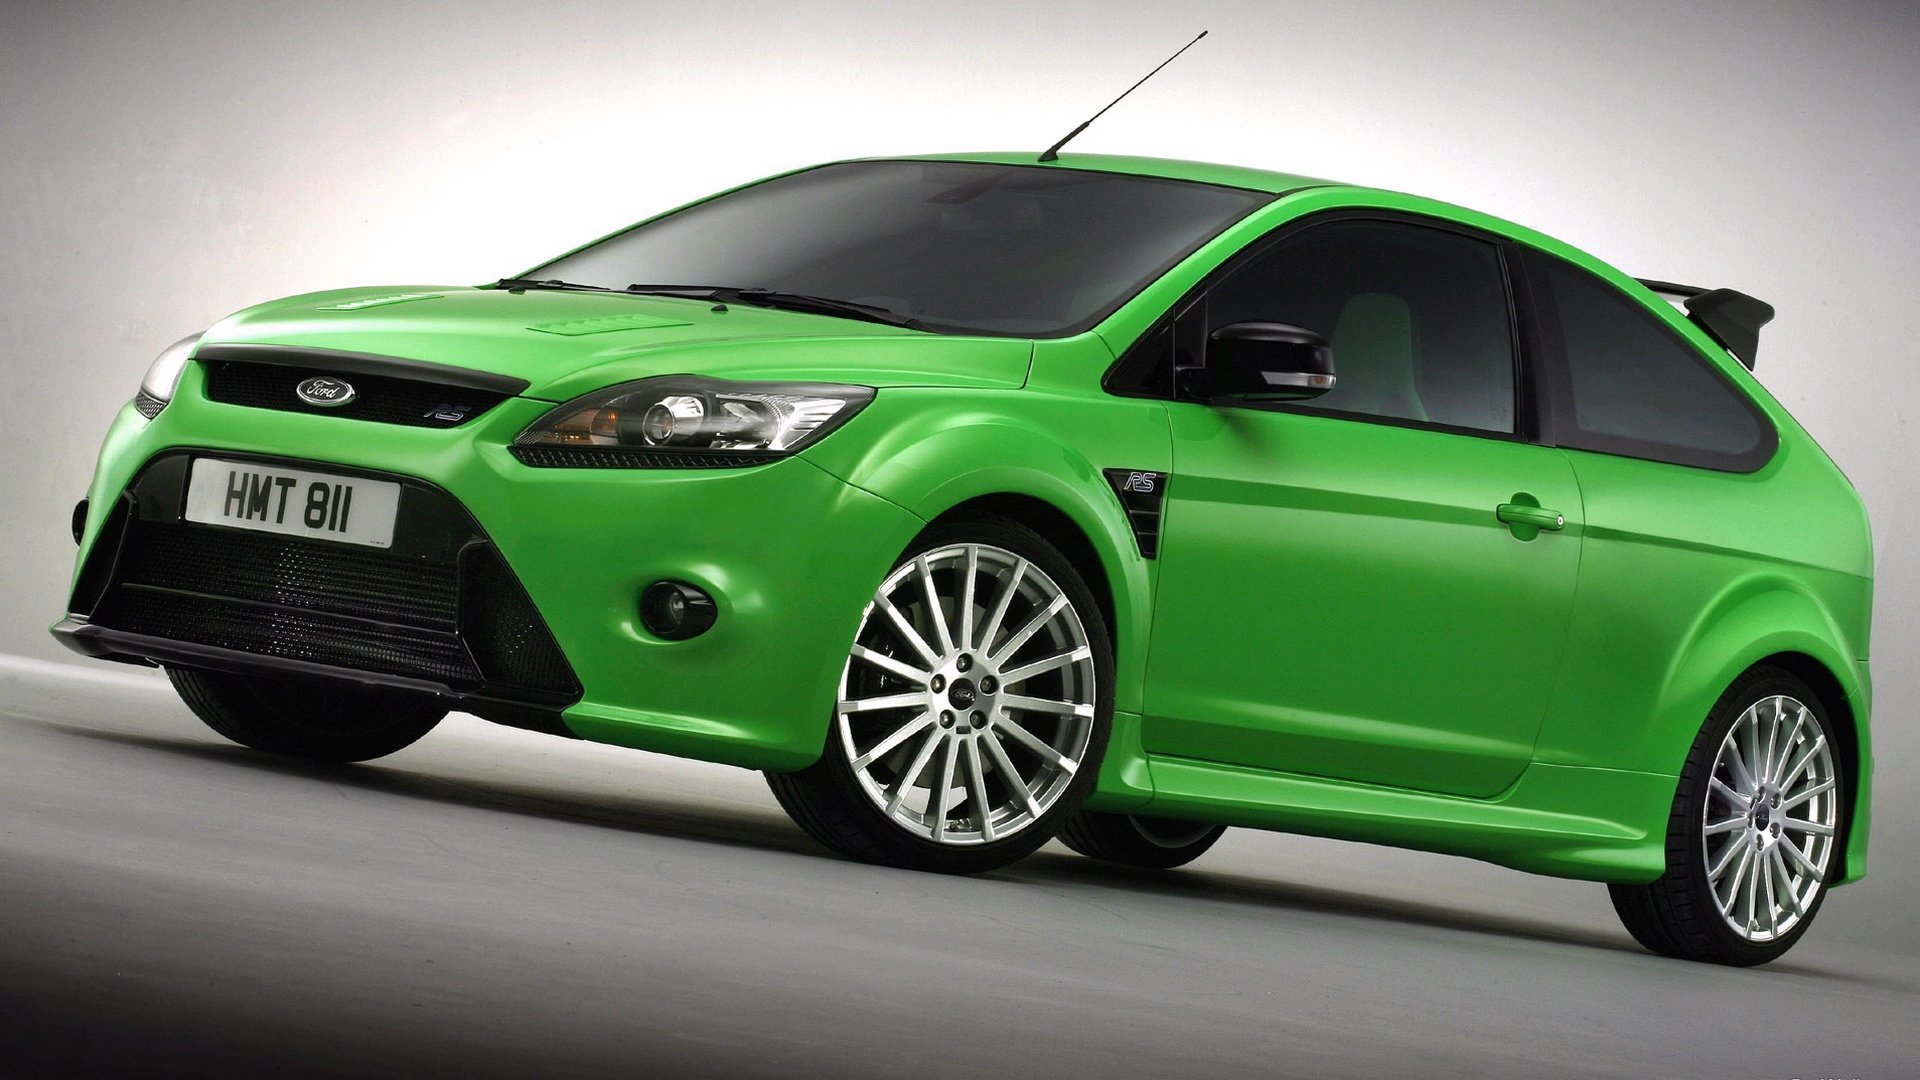 Ford Focus Wallpapers Hd For Desktop Backgrounds